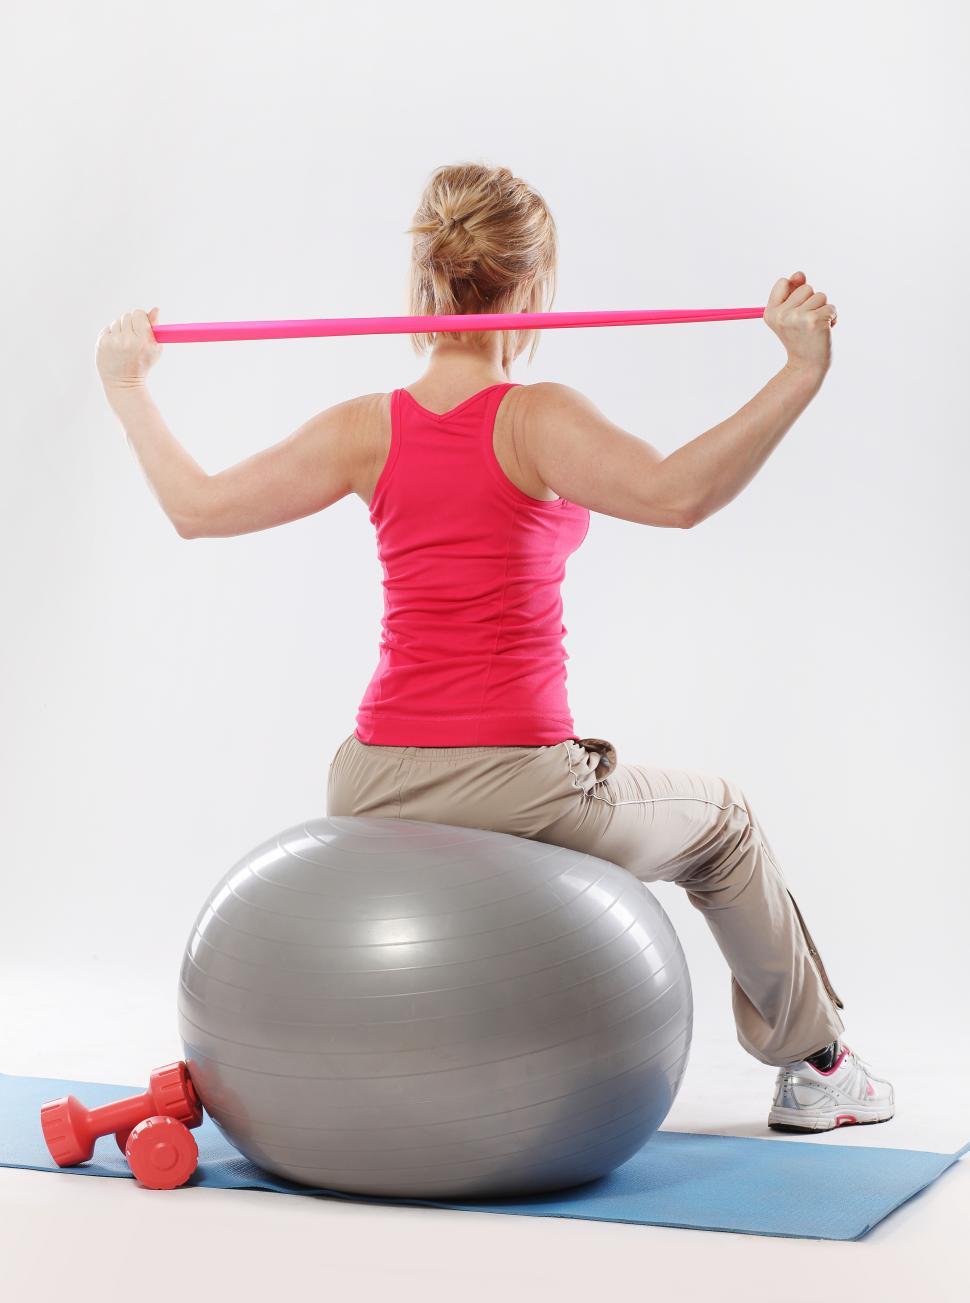 Free Image of Woman working out on an exercise ball 